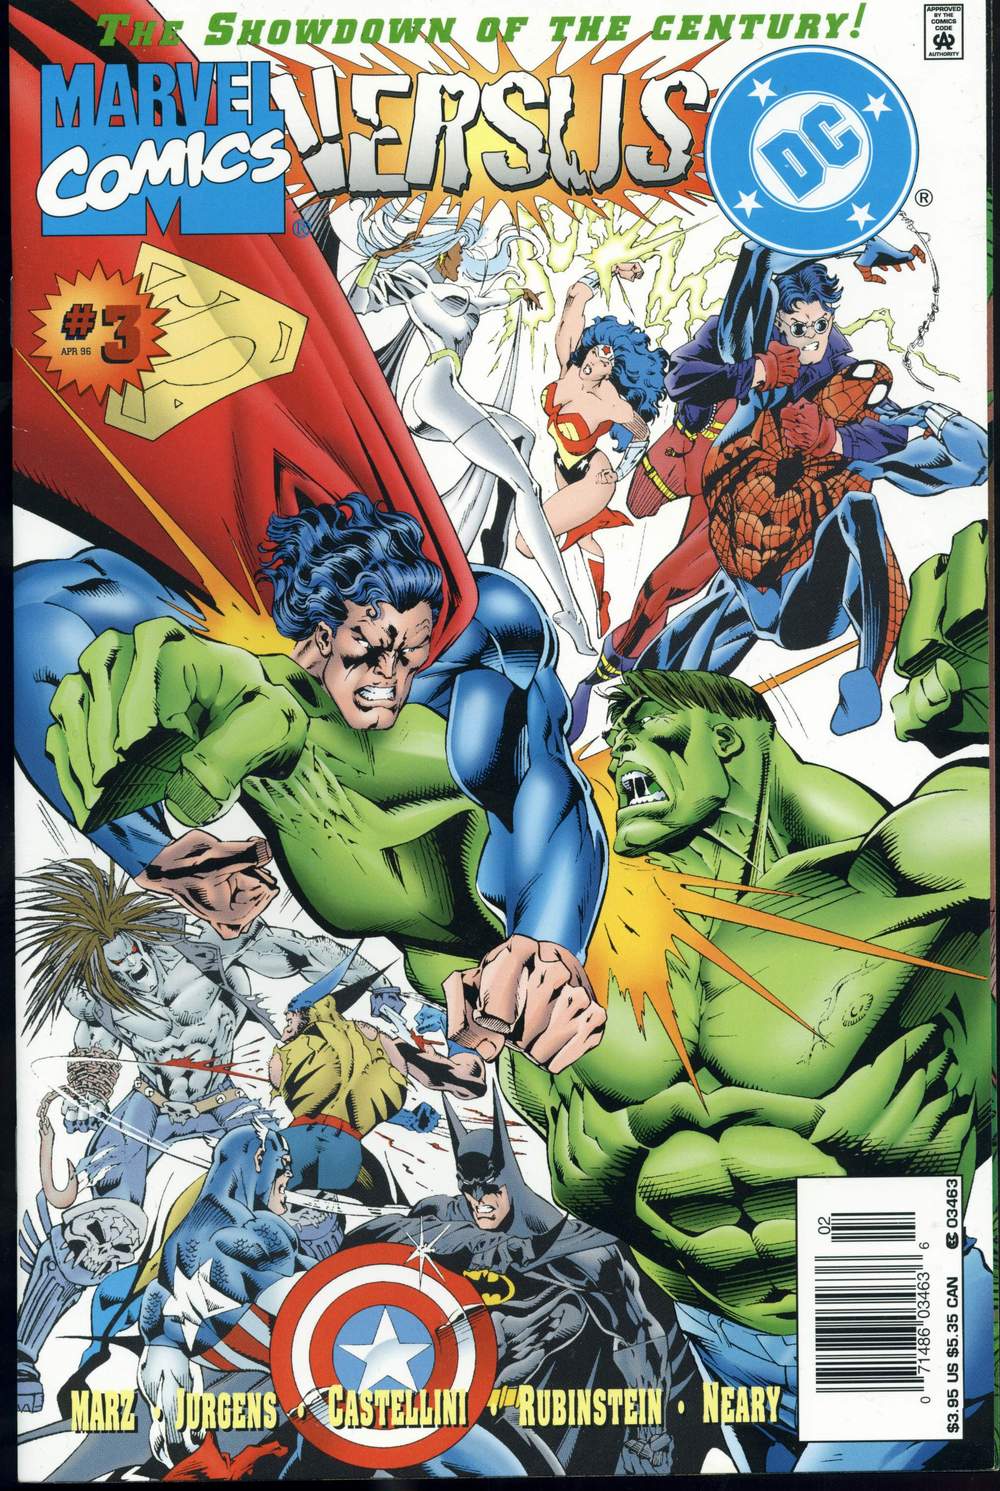 Dc Vs Marvel Issue 3 Viewcomic Reading Comics Online For Free 19